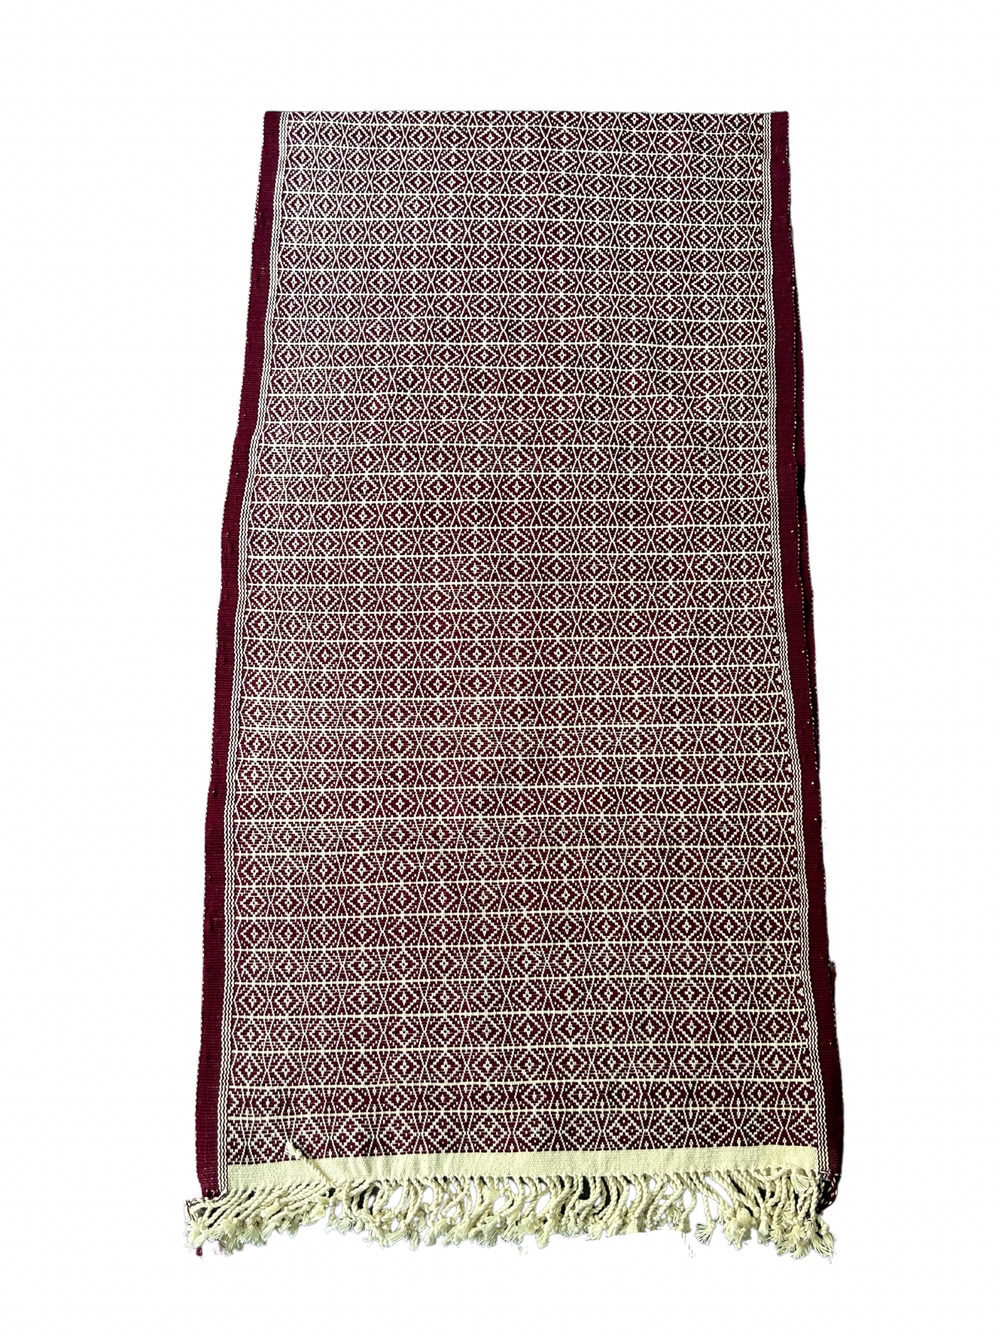 Natural Dyed Handwoven Cotton Table Runner